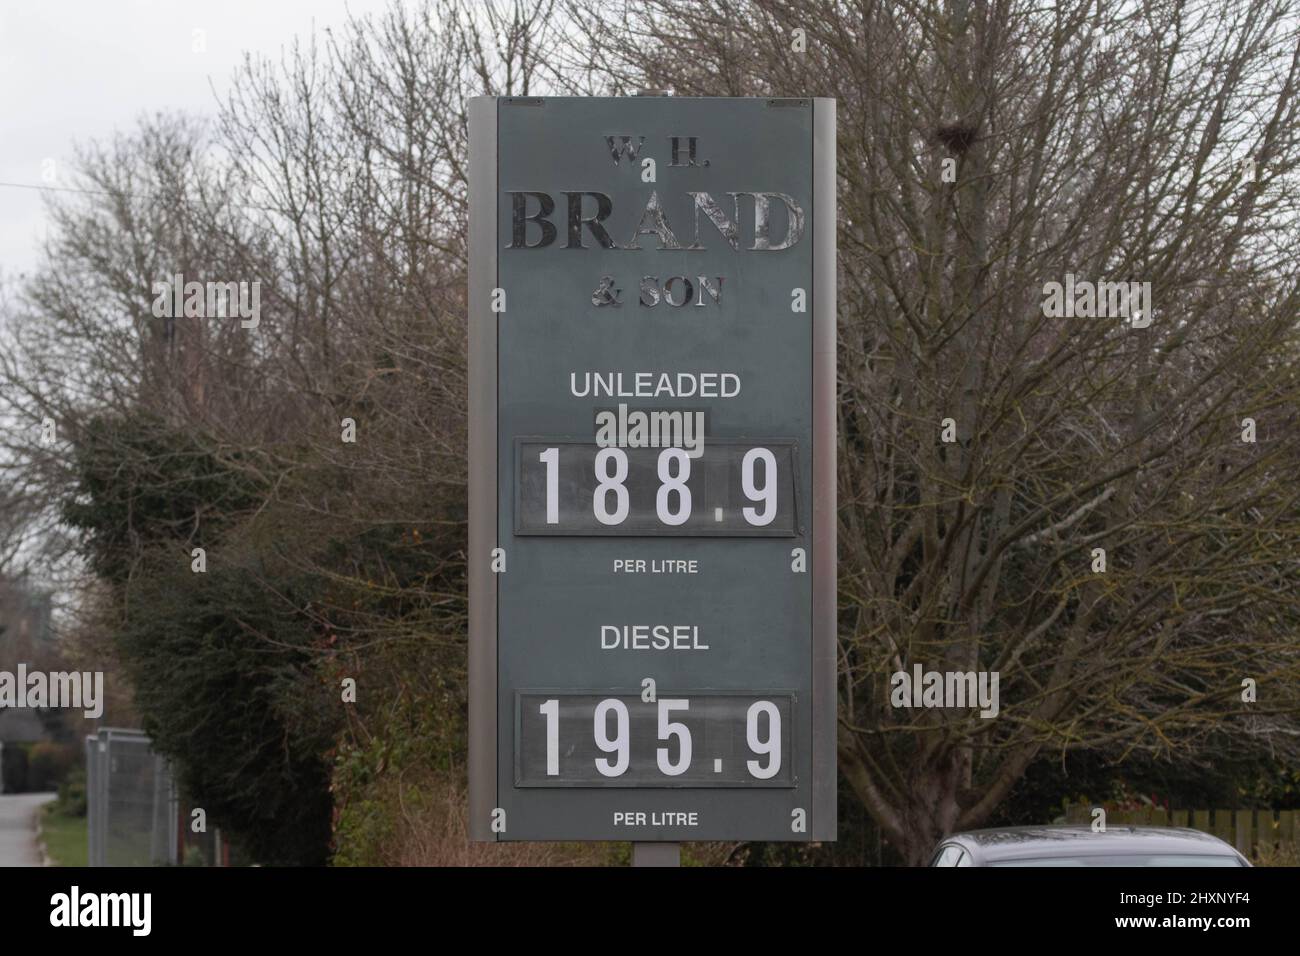 Lincolnshire, Uk, 13/03/2022, Lincolnshire garage W H Brand selling Diesel at 195.9 and unleaded fuel at 188.9 as fuel prices remain high. Stock Photo